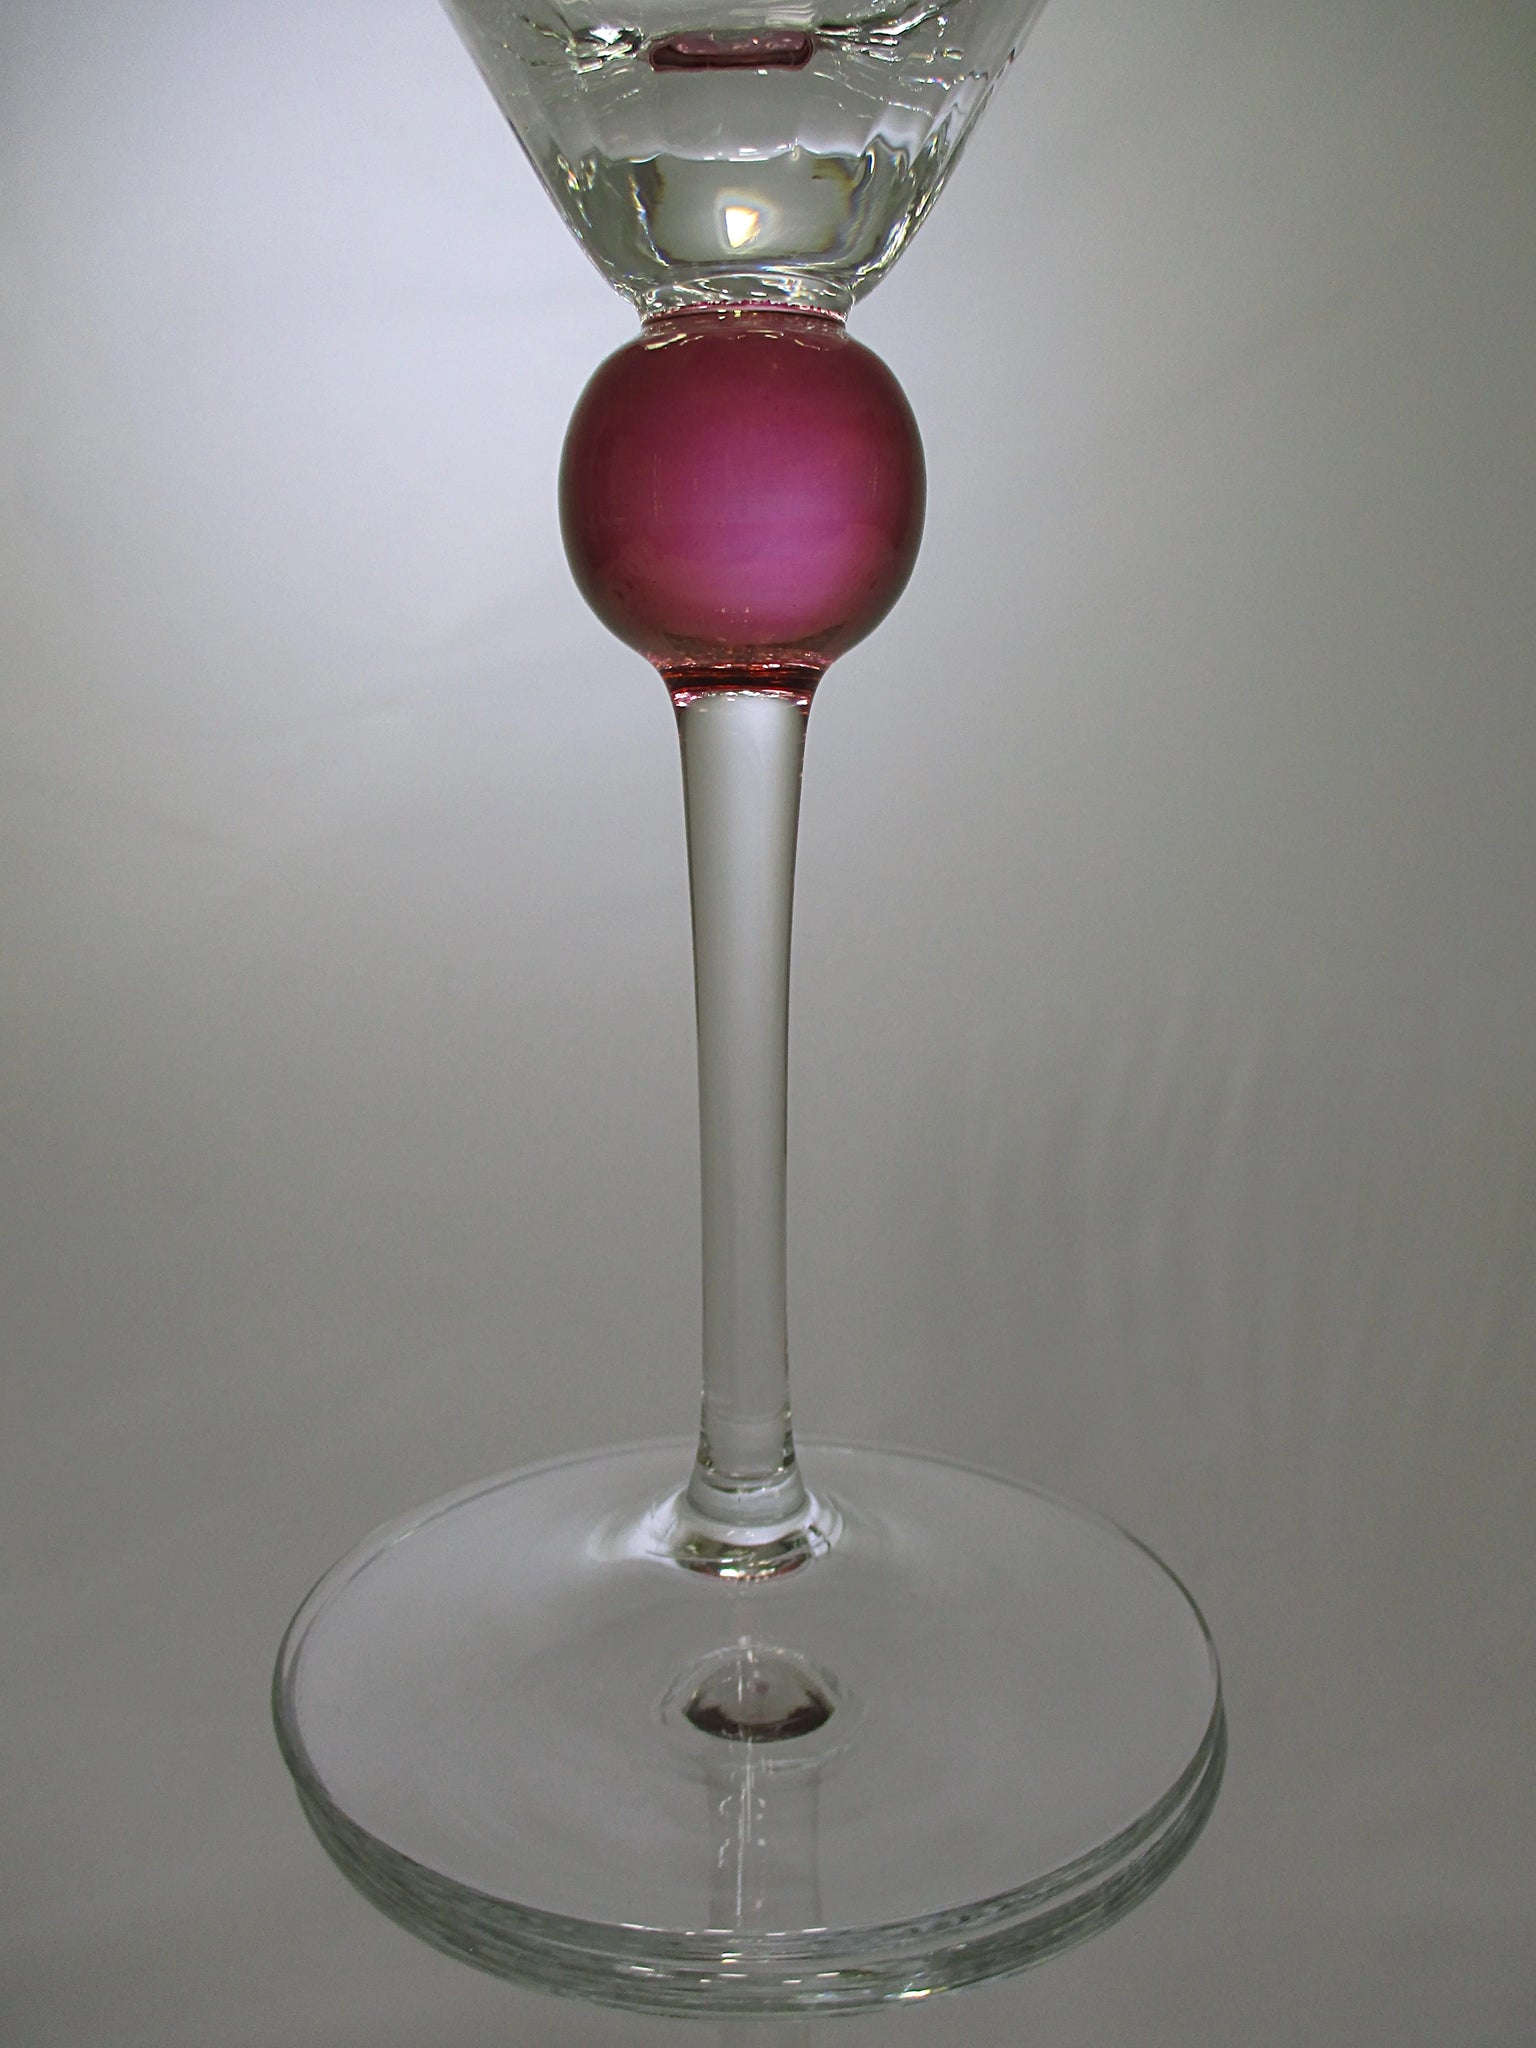 1/2pc 350ml 12oz Ripple Short Stemmed Goblet Glass Cup With Pink